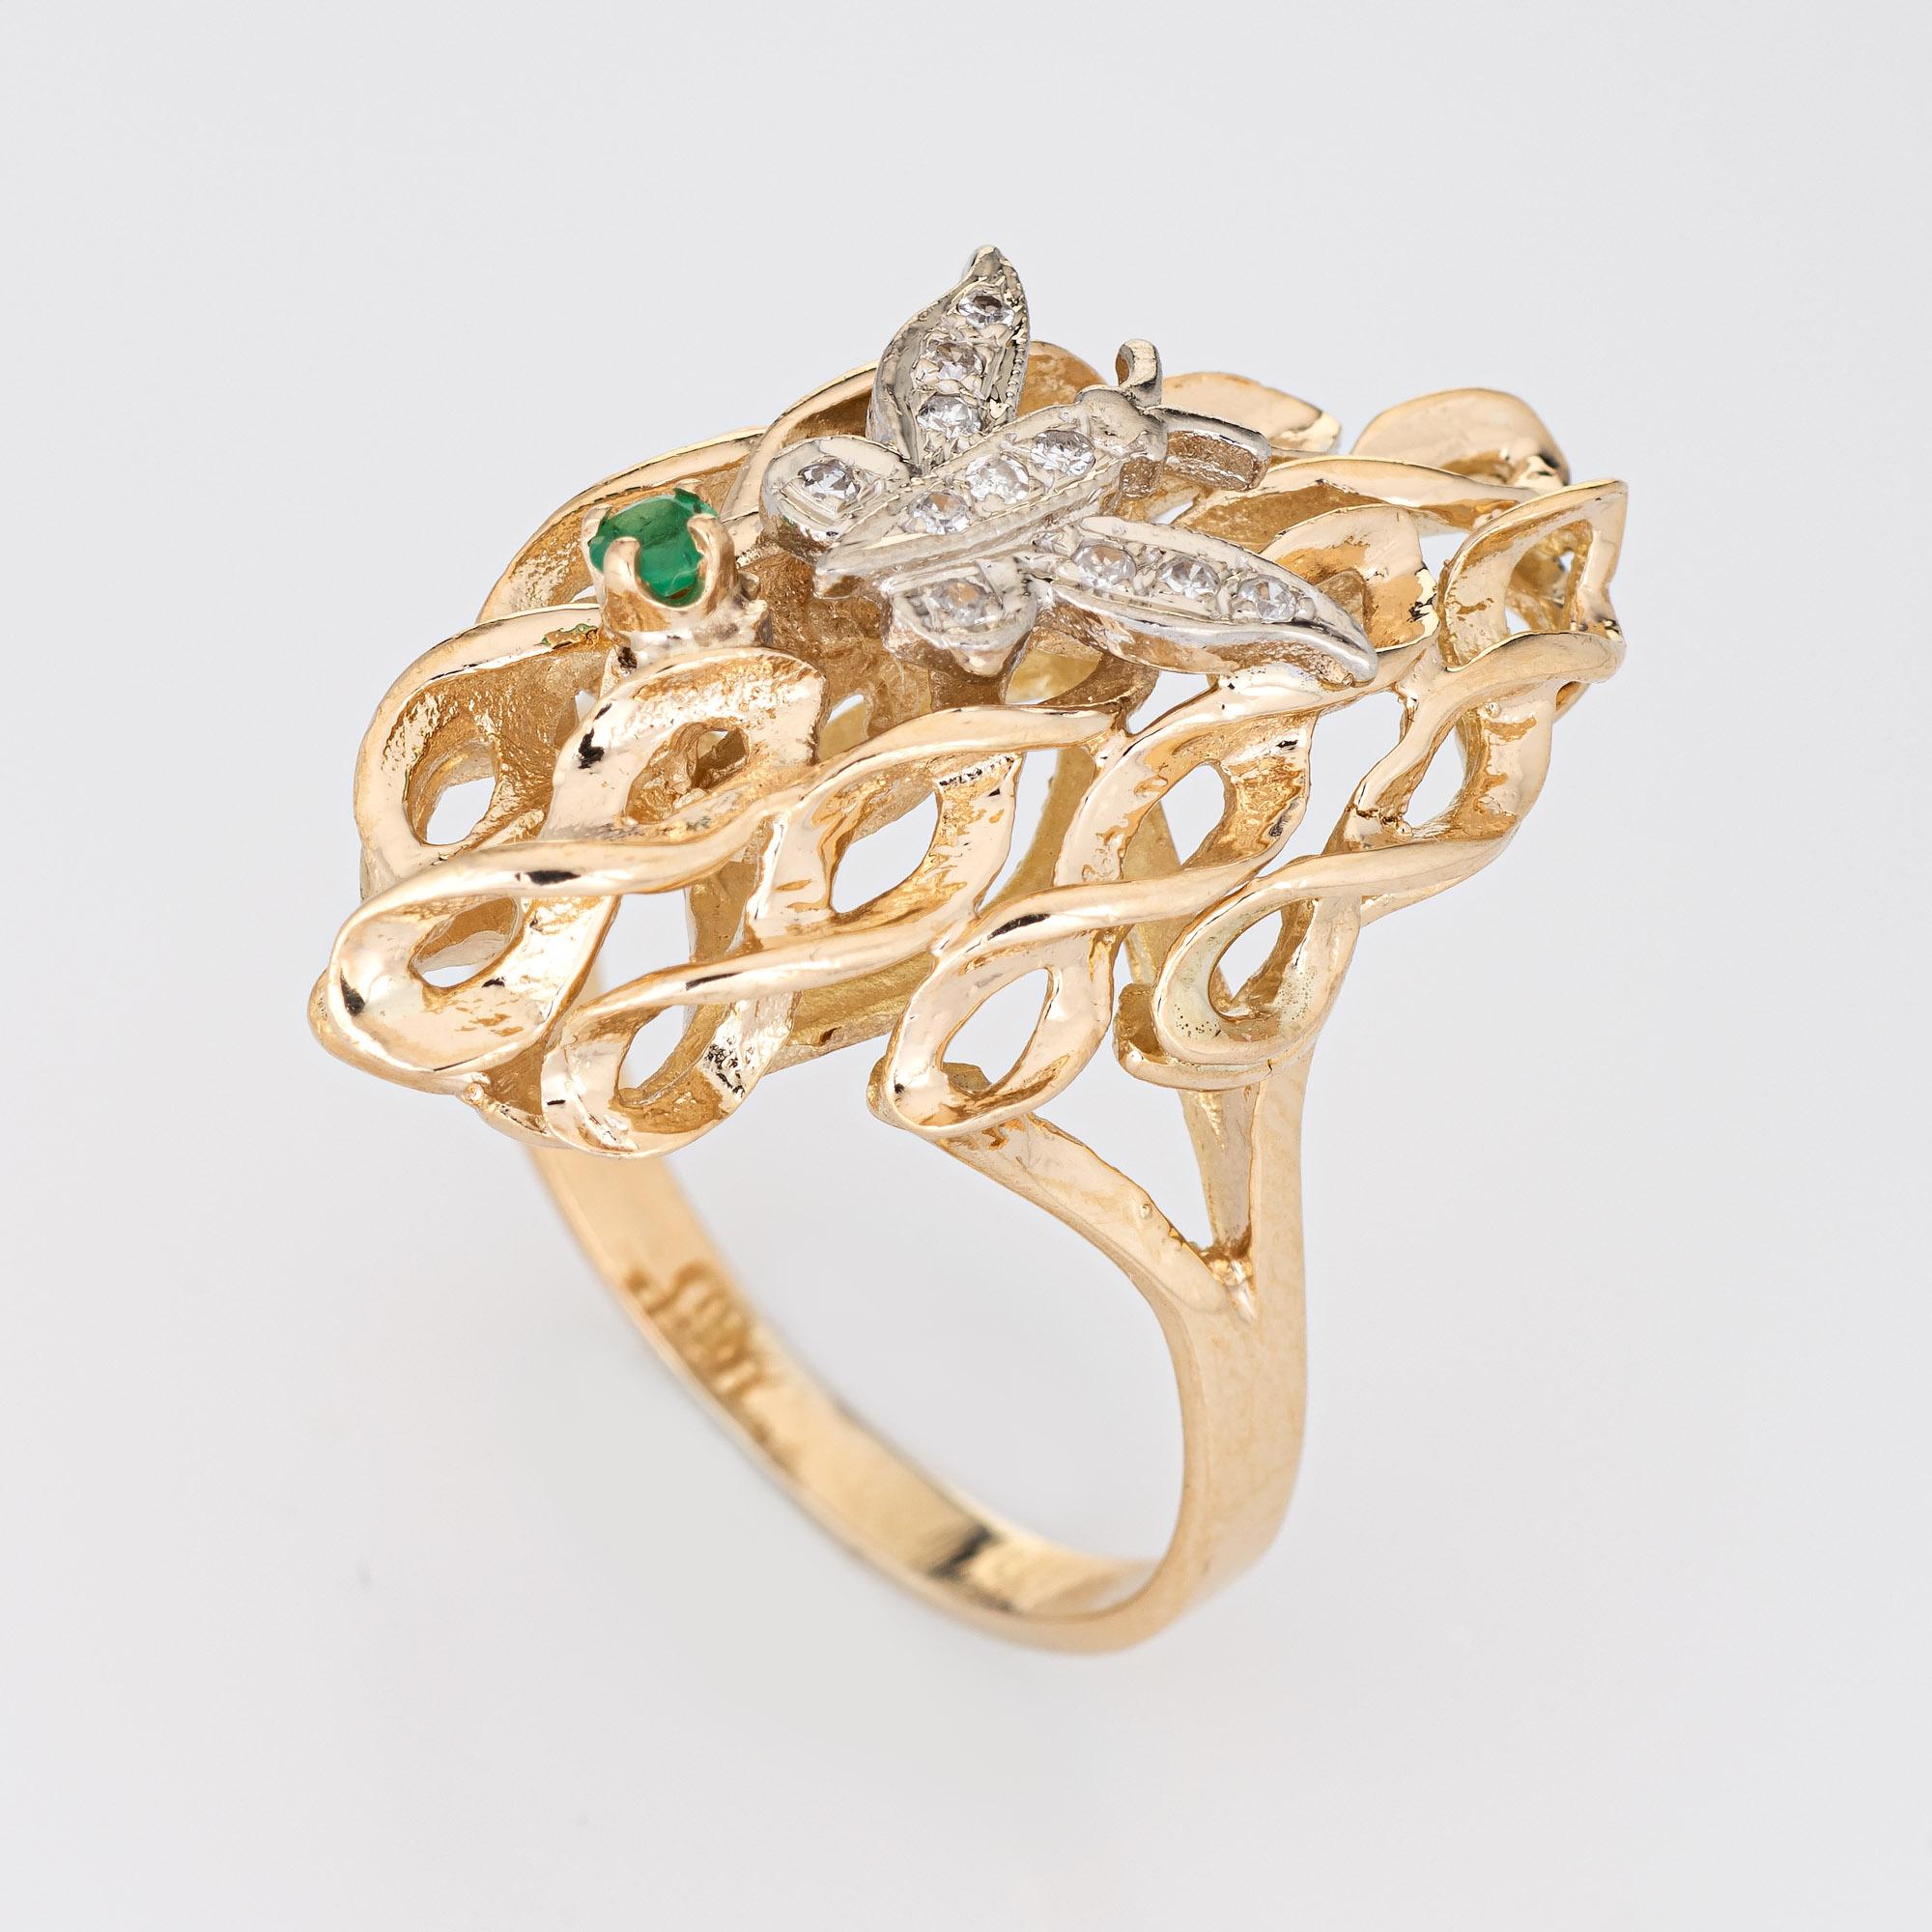 Stylish vintage diamond butterfly ring (circa 1970s to 1980s) crafted in 14 karat yellow gold. 

Diamonds total an estimated 0.05 carats (estimated at I-J color and SI2-I2 clarity), accented with one estimated 0.04 carat emerald.  

The nicely